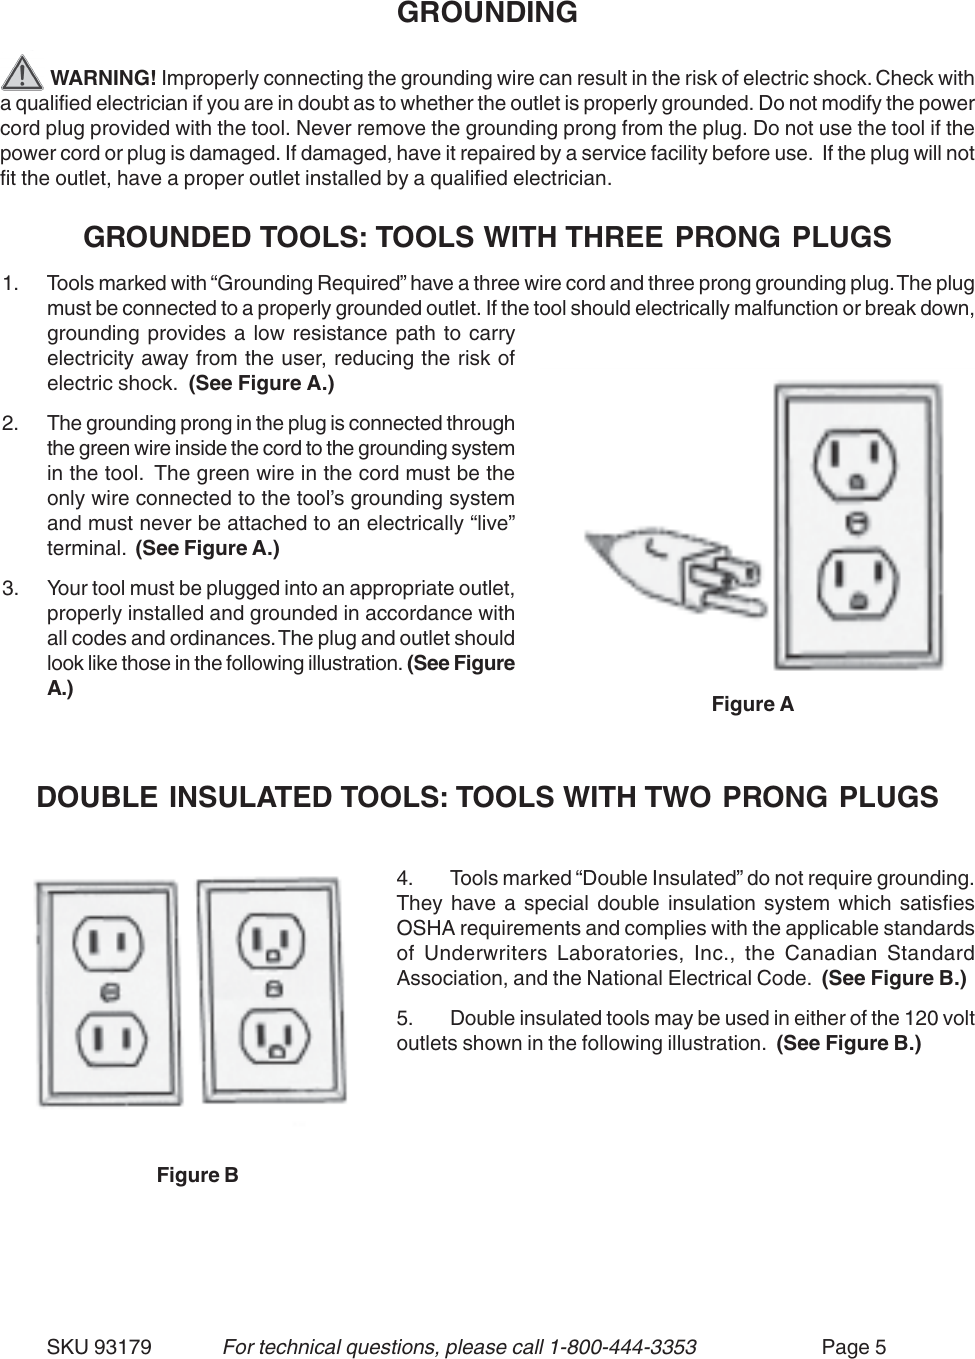 Page 5 of 12 - Harbor-Freight Harbor-Freight-93179-Users-Manual- 93179 Angle Grinder  Harbor-freight-93179-users-manual